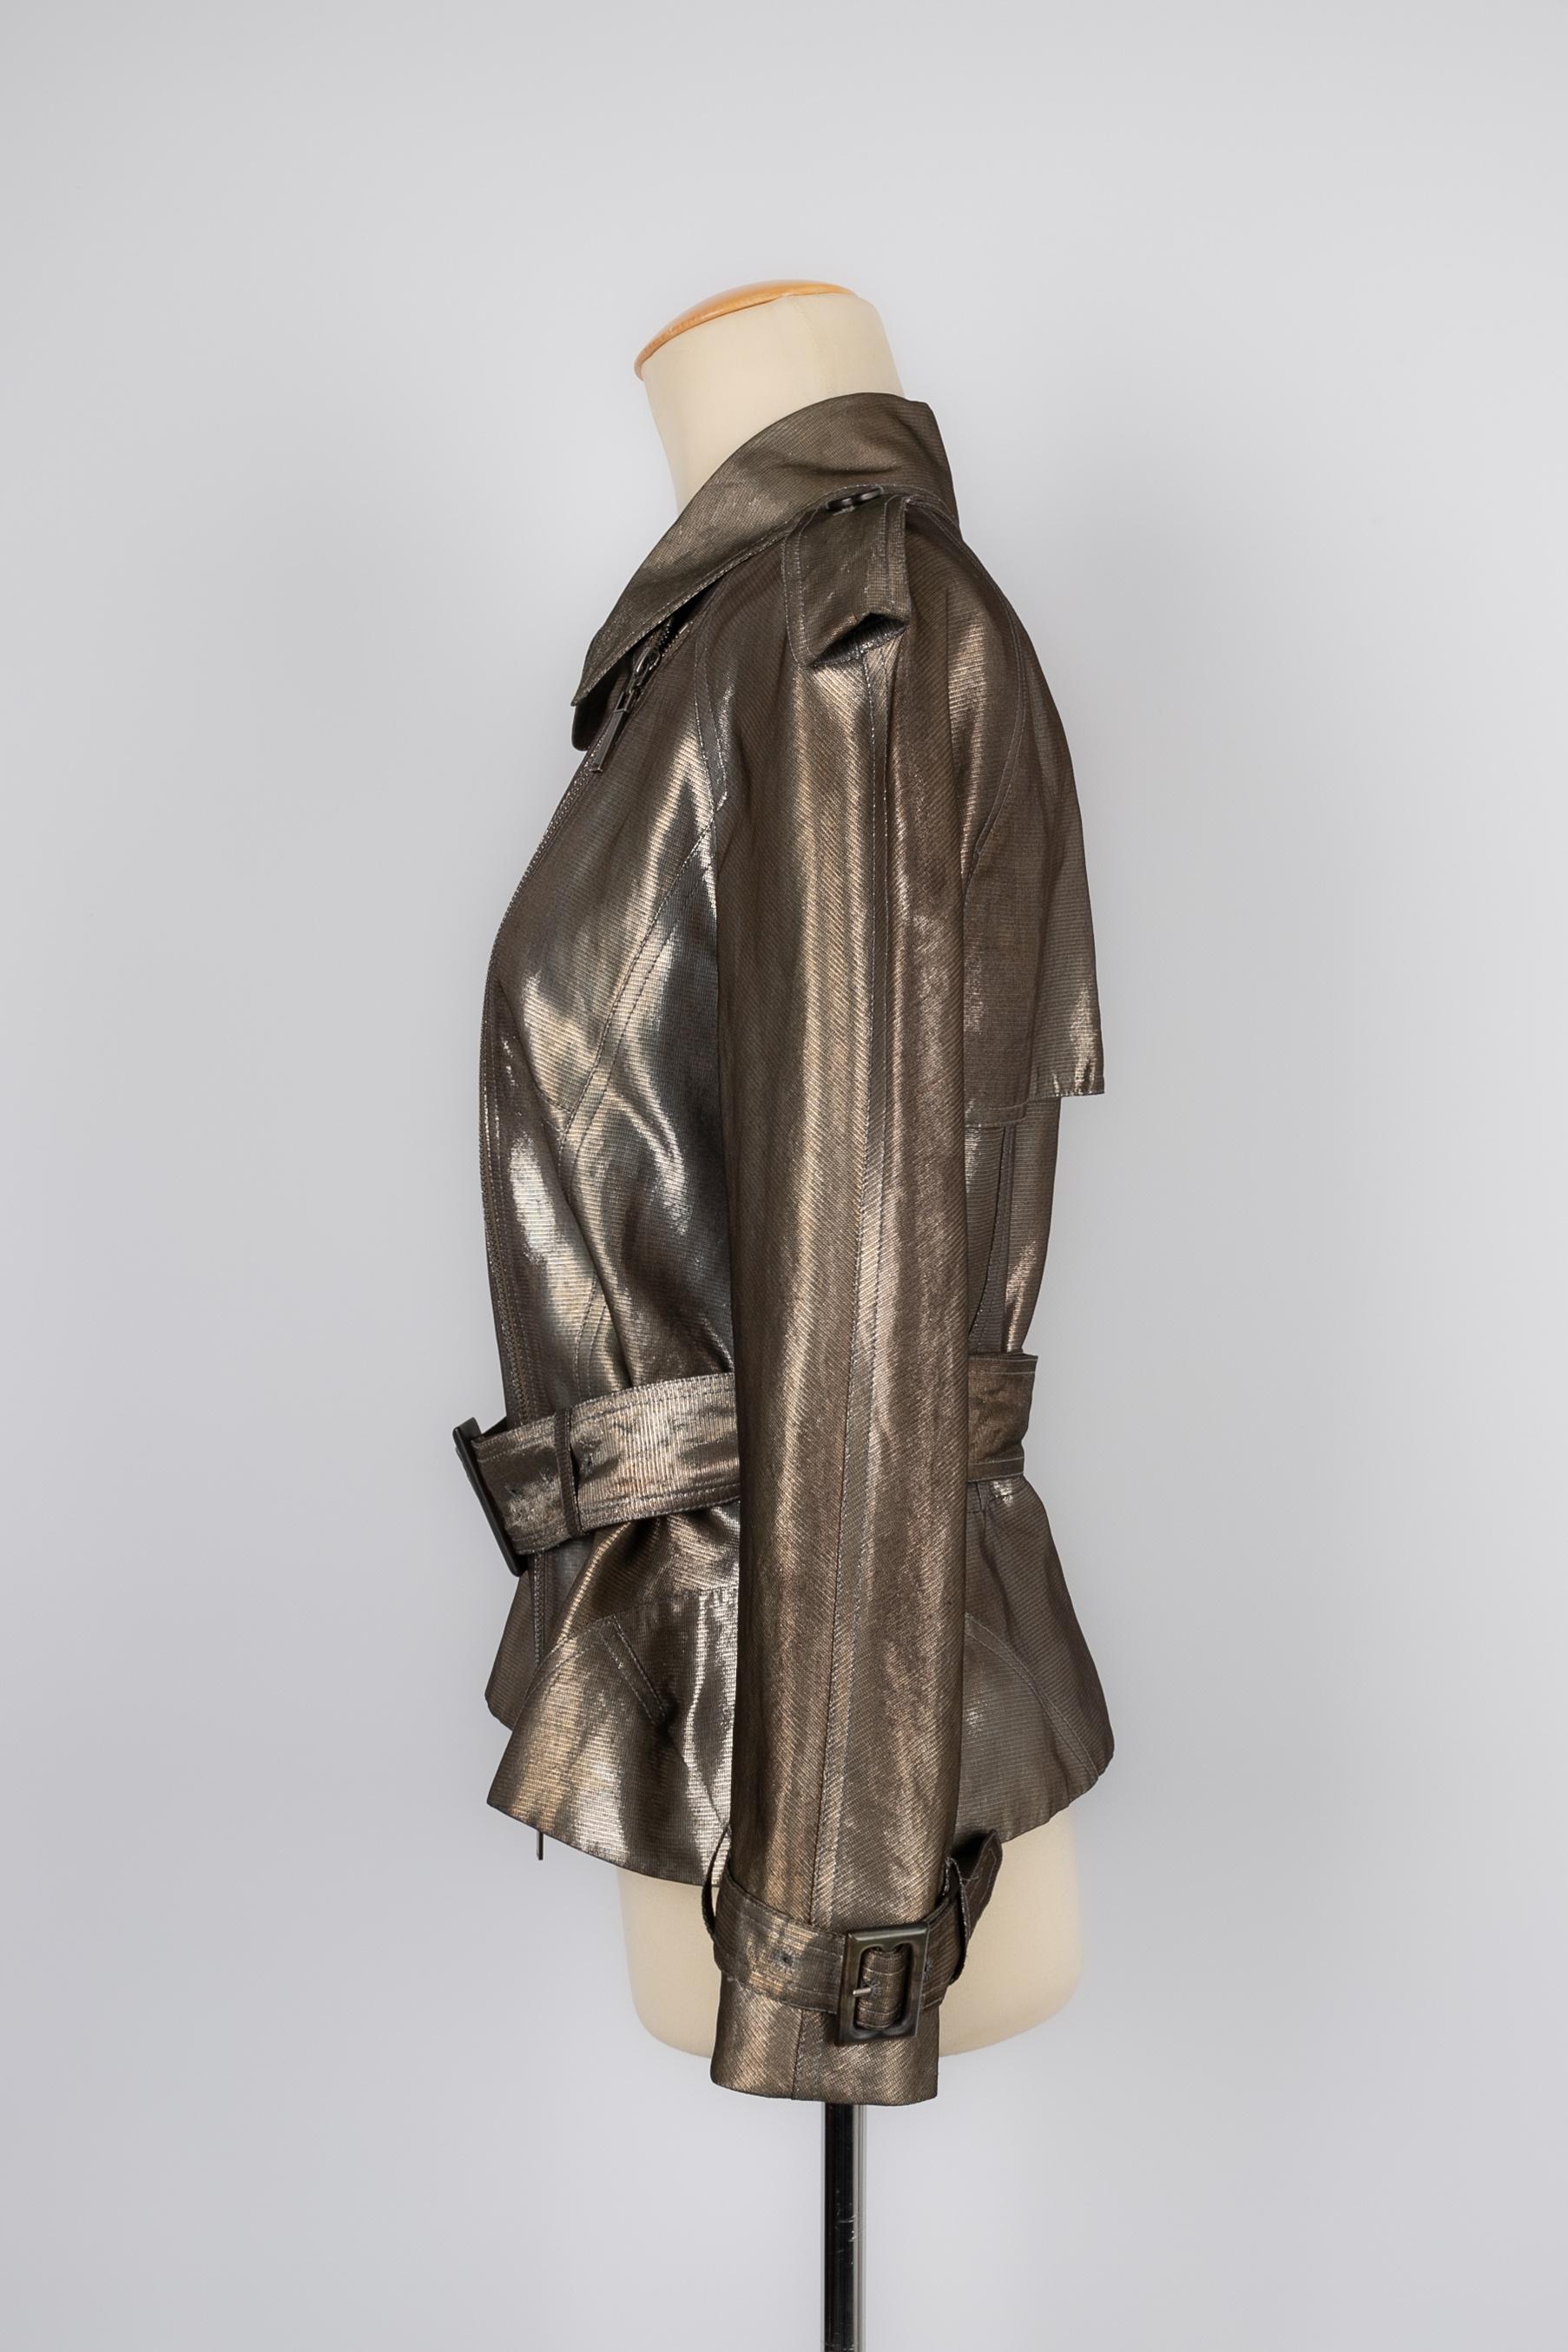 DIOR - (Made in France) Bronze lamé jacket. Silk lining. Size 40FR. Piece designed under the artistic direction of John Galliano.

Condition:
Very good condition

Dimensions:
Shoulder width: 40 cm - Sleeve length: 52 cm - Length: 57 cm

FV24